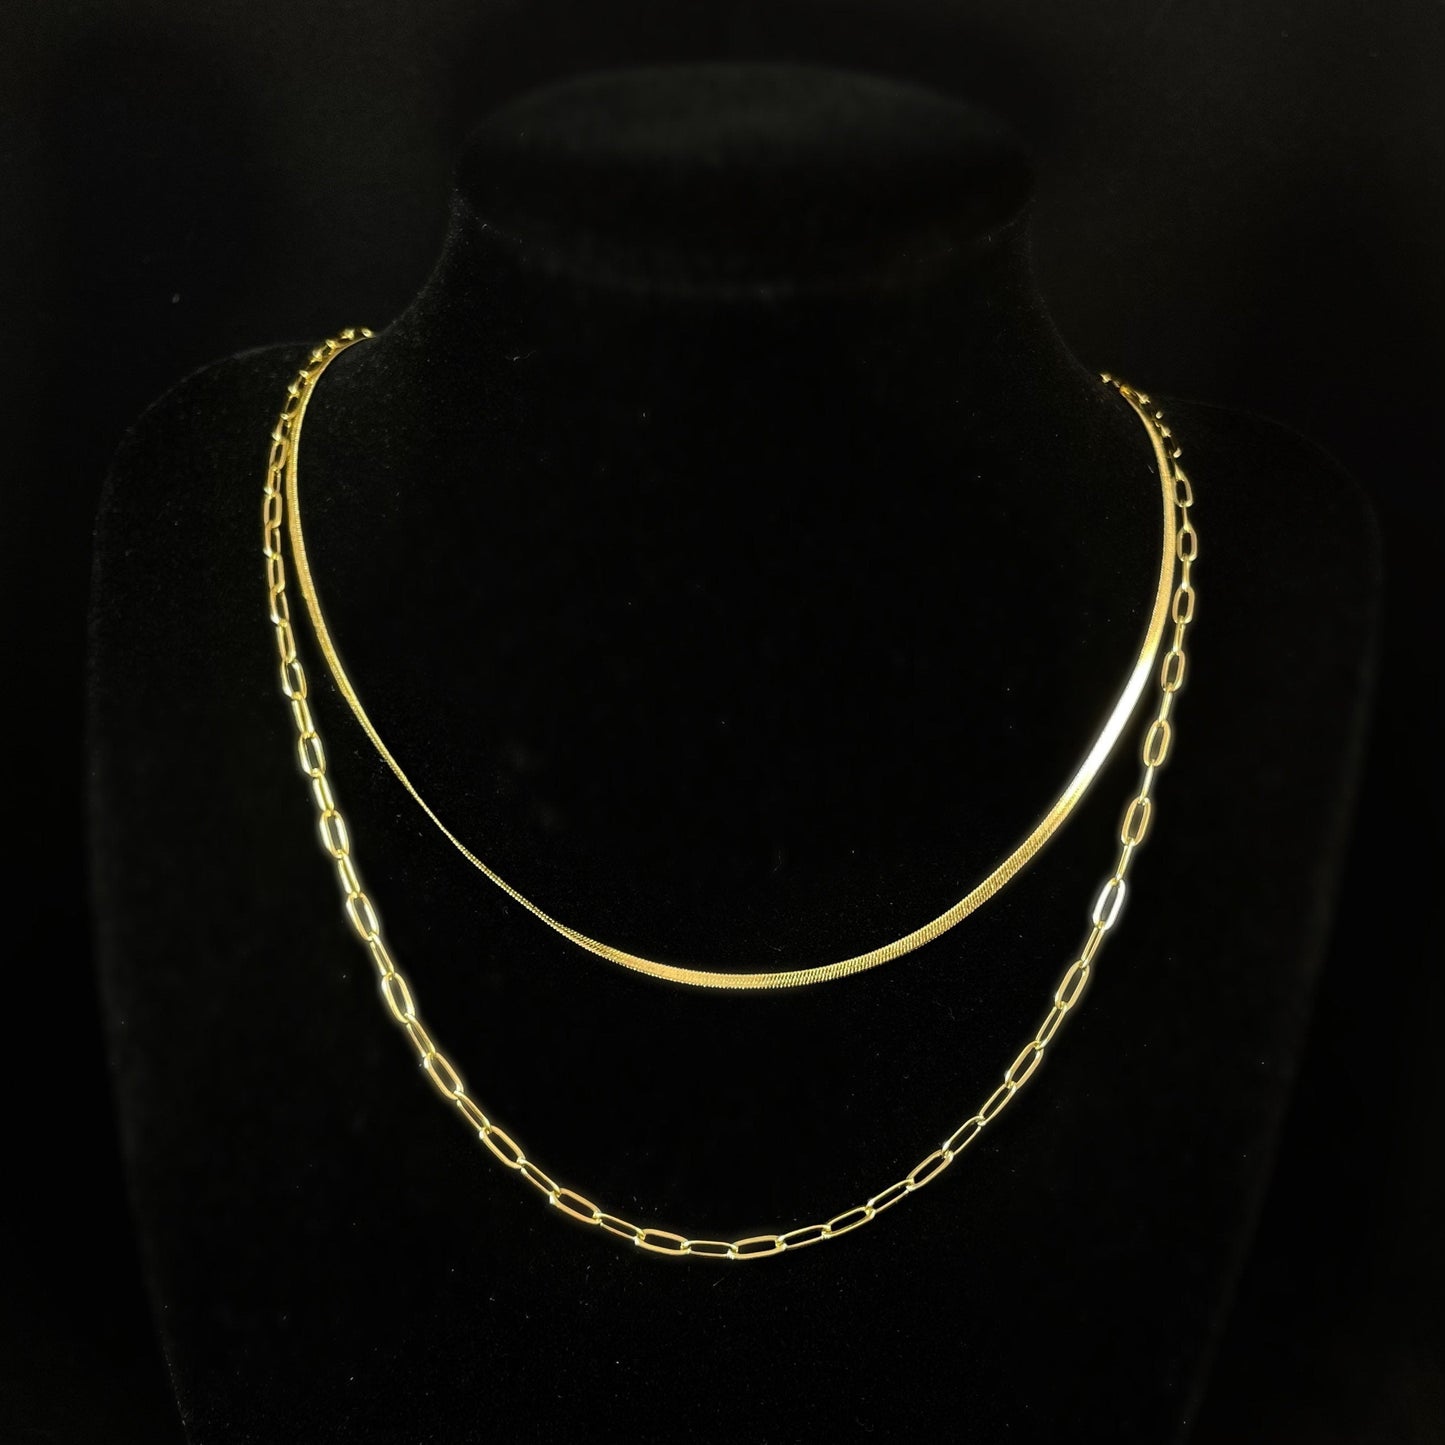 Multi Strand Gold Chain Necklace - Handmade in Spain